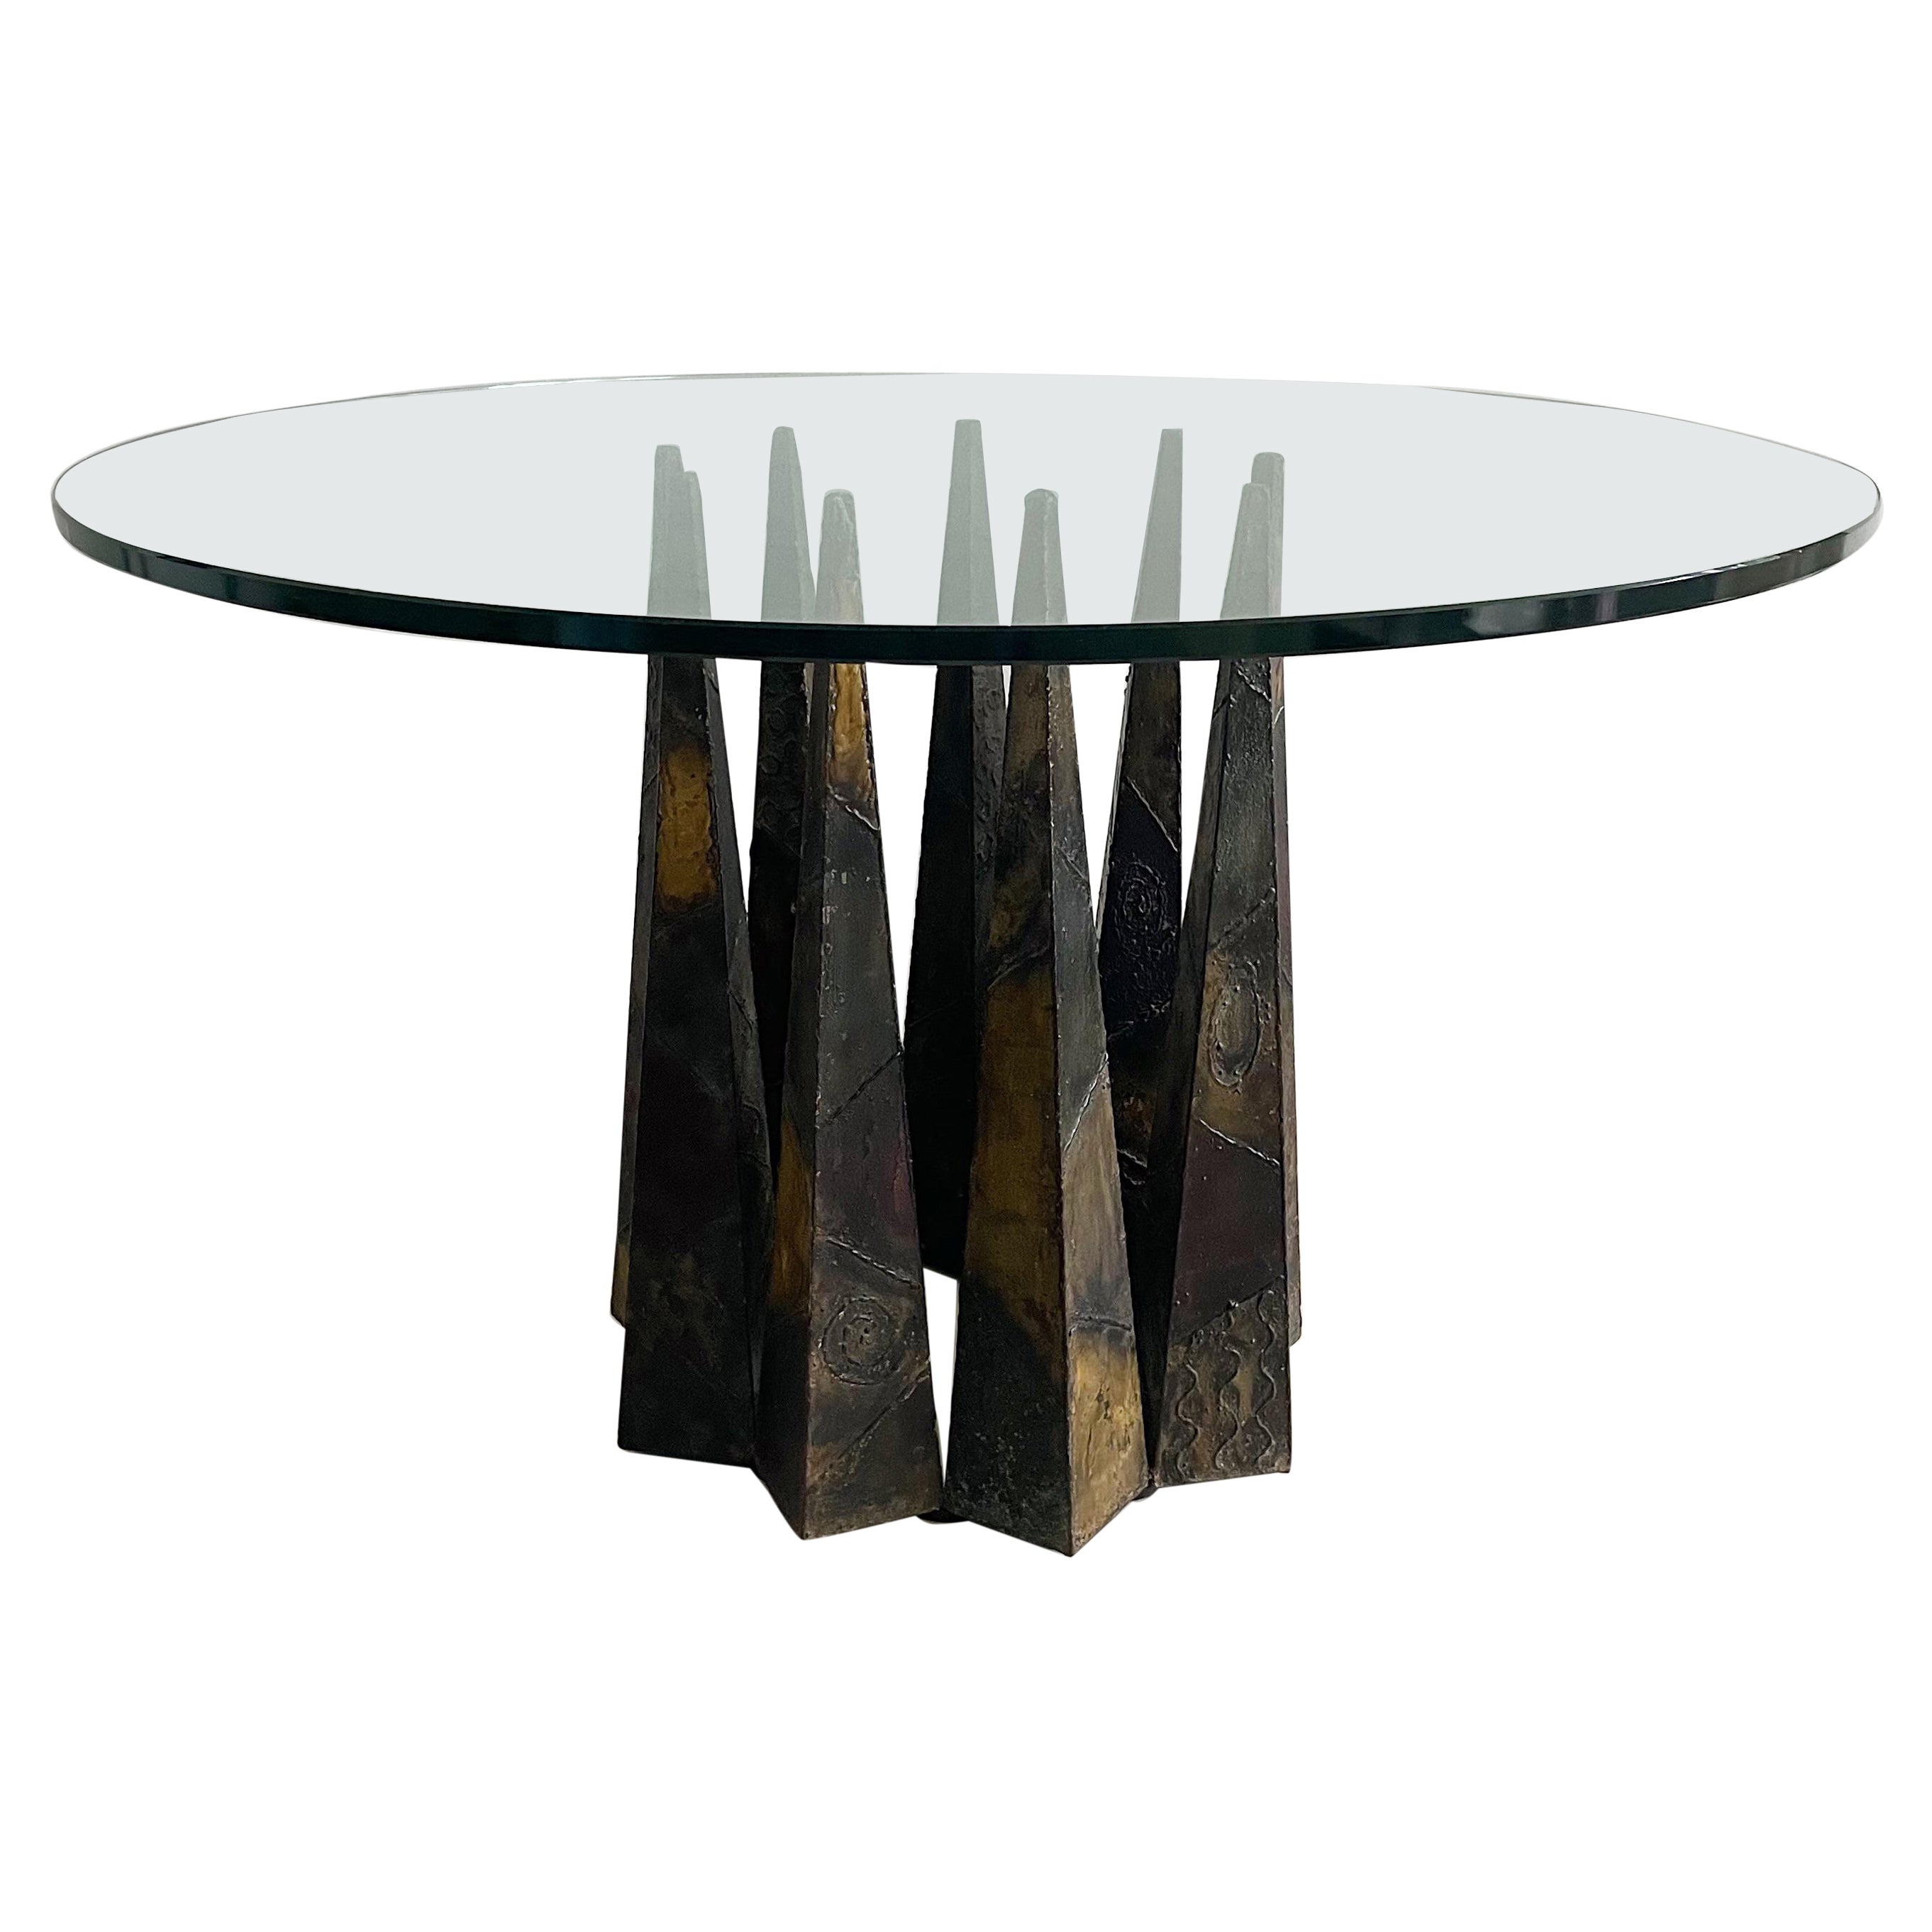 Rare Circular Paul Evans Welded and Patinated Steel Dining Table for Directional